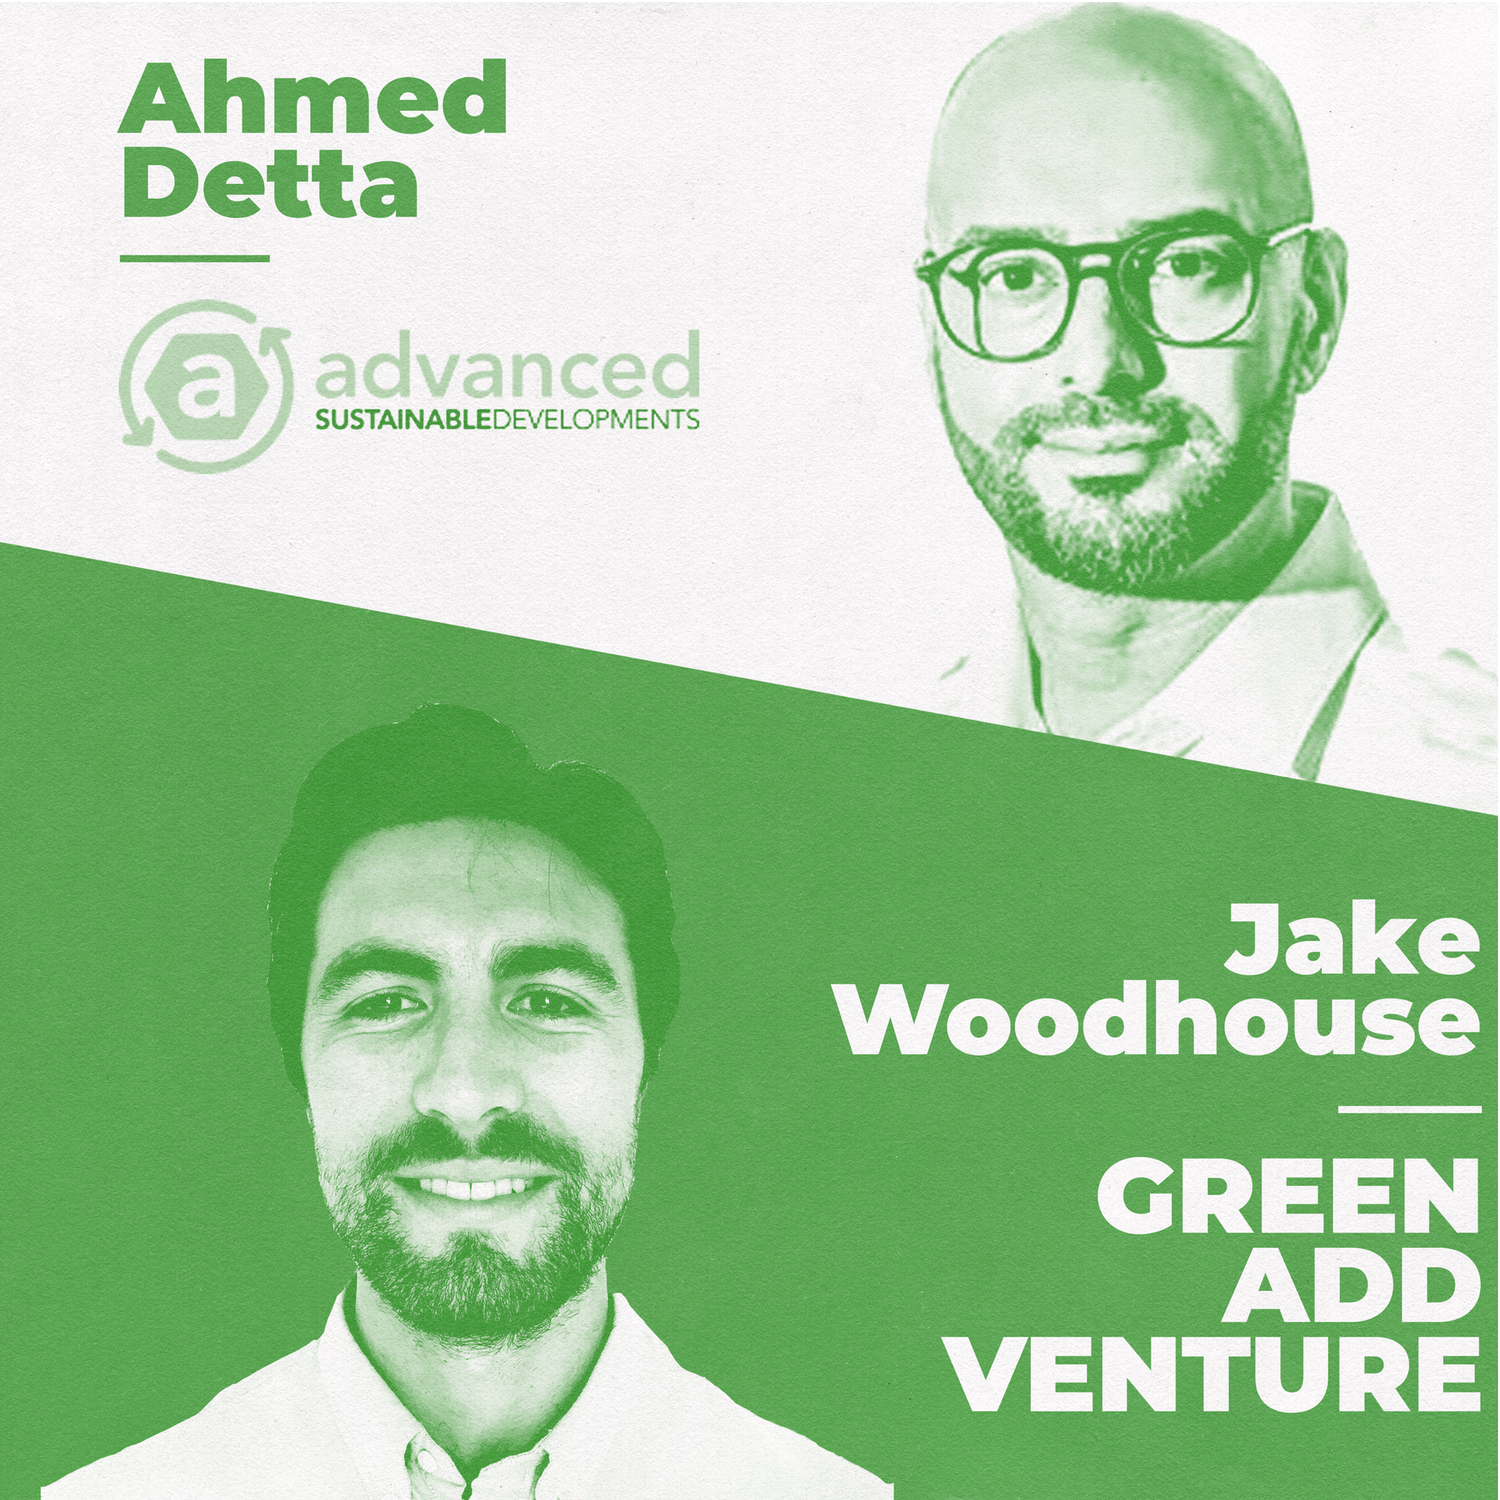 11: Ahmed Detta - Advanced Sustainable Development - Transforming Plastic Recycling